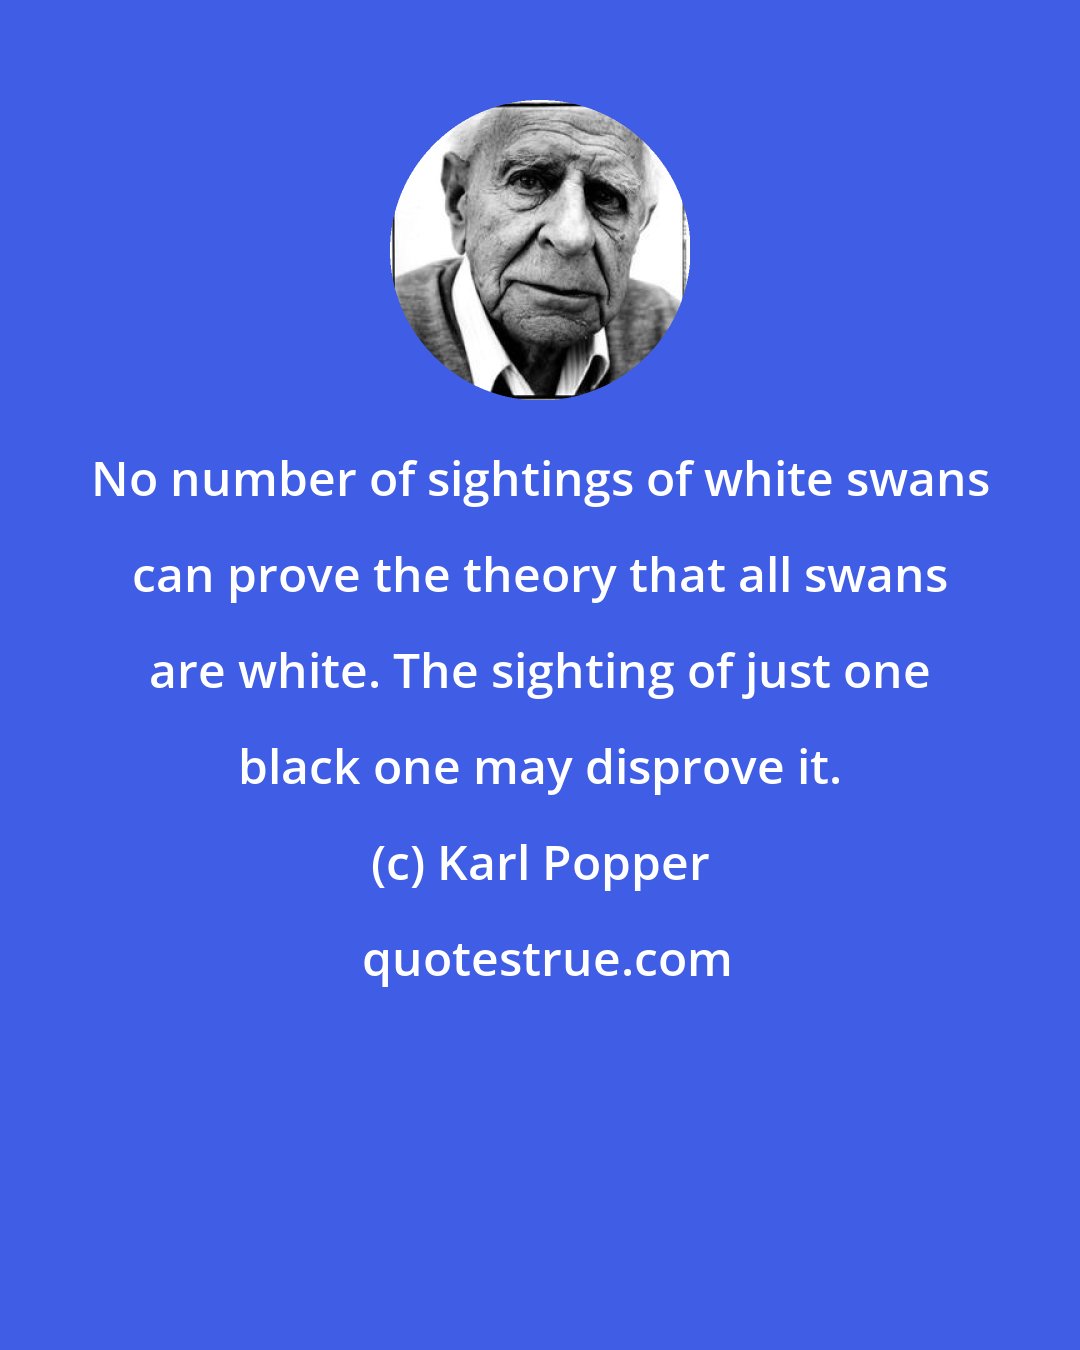 Karl Popper: No number of sightings of white swans can prove the theory that all swans are white. The sighting of just one black one may disprove it.